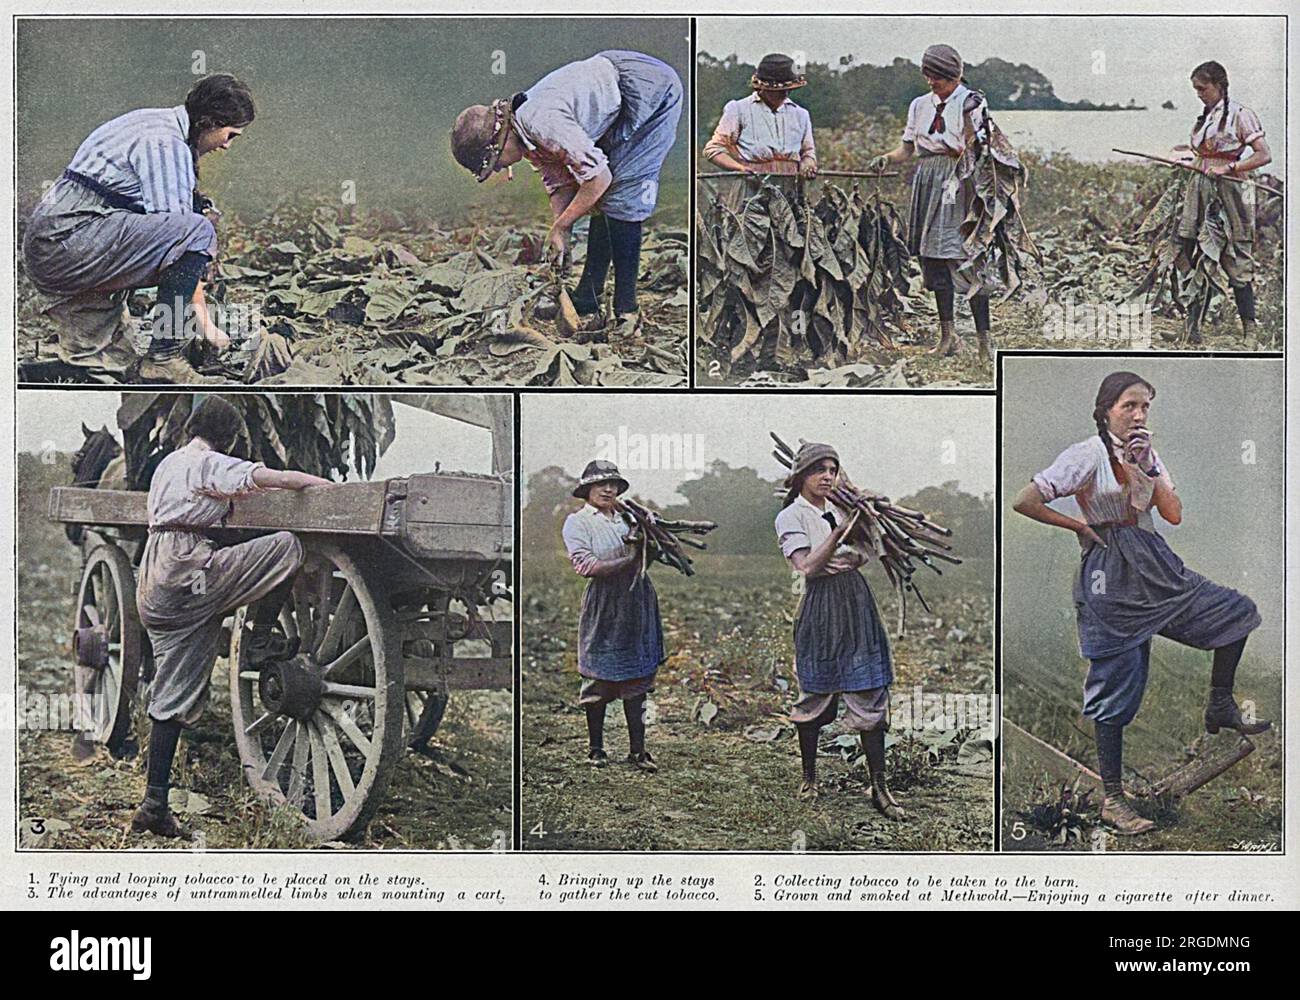 Women workers gathering the harvest on the tobacco farm at Methwold, Norfolk in 1915.  Picture 1 shows them tying and looping tobacco to be placed on stays, 2 shows them collecting tobacco to be taken to the barn, 3, 'the advantages of untrammelled limbs when mounting a cart', alluding to the breeches worn, 4, bringing the stays to gather the tobacco and 5, Grown and smoked in Methwold, a girl enjoys a cigarette after dinner. Stock Photo